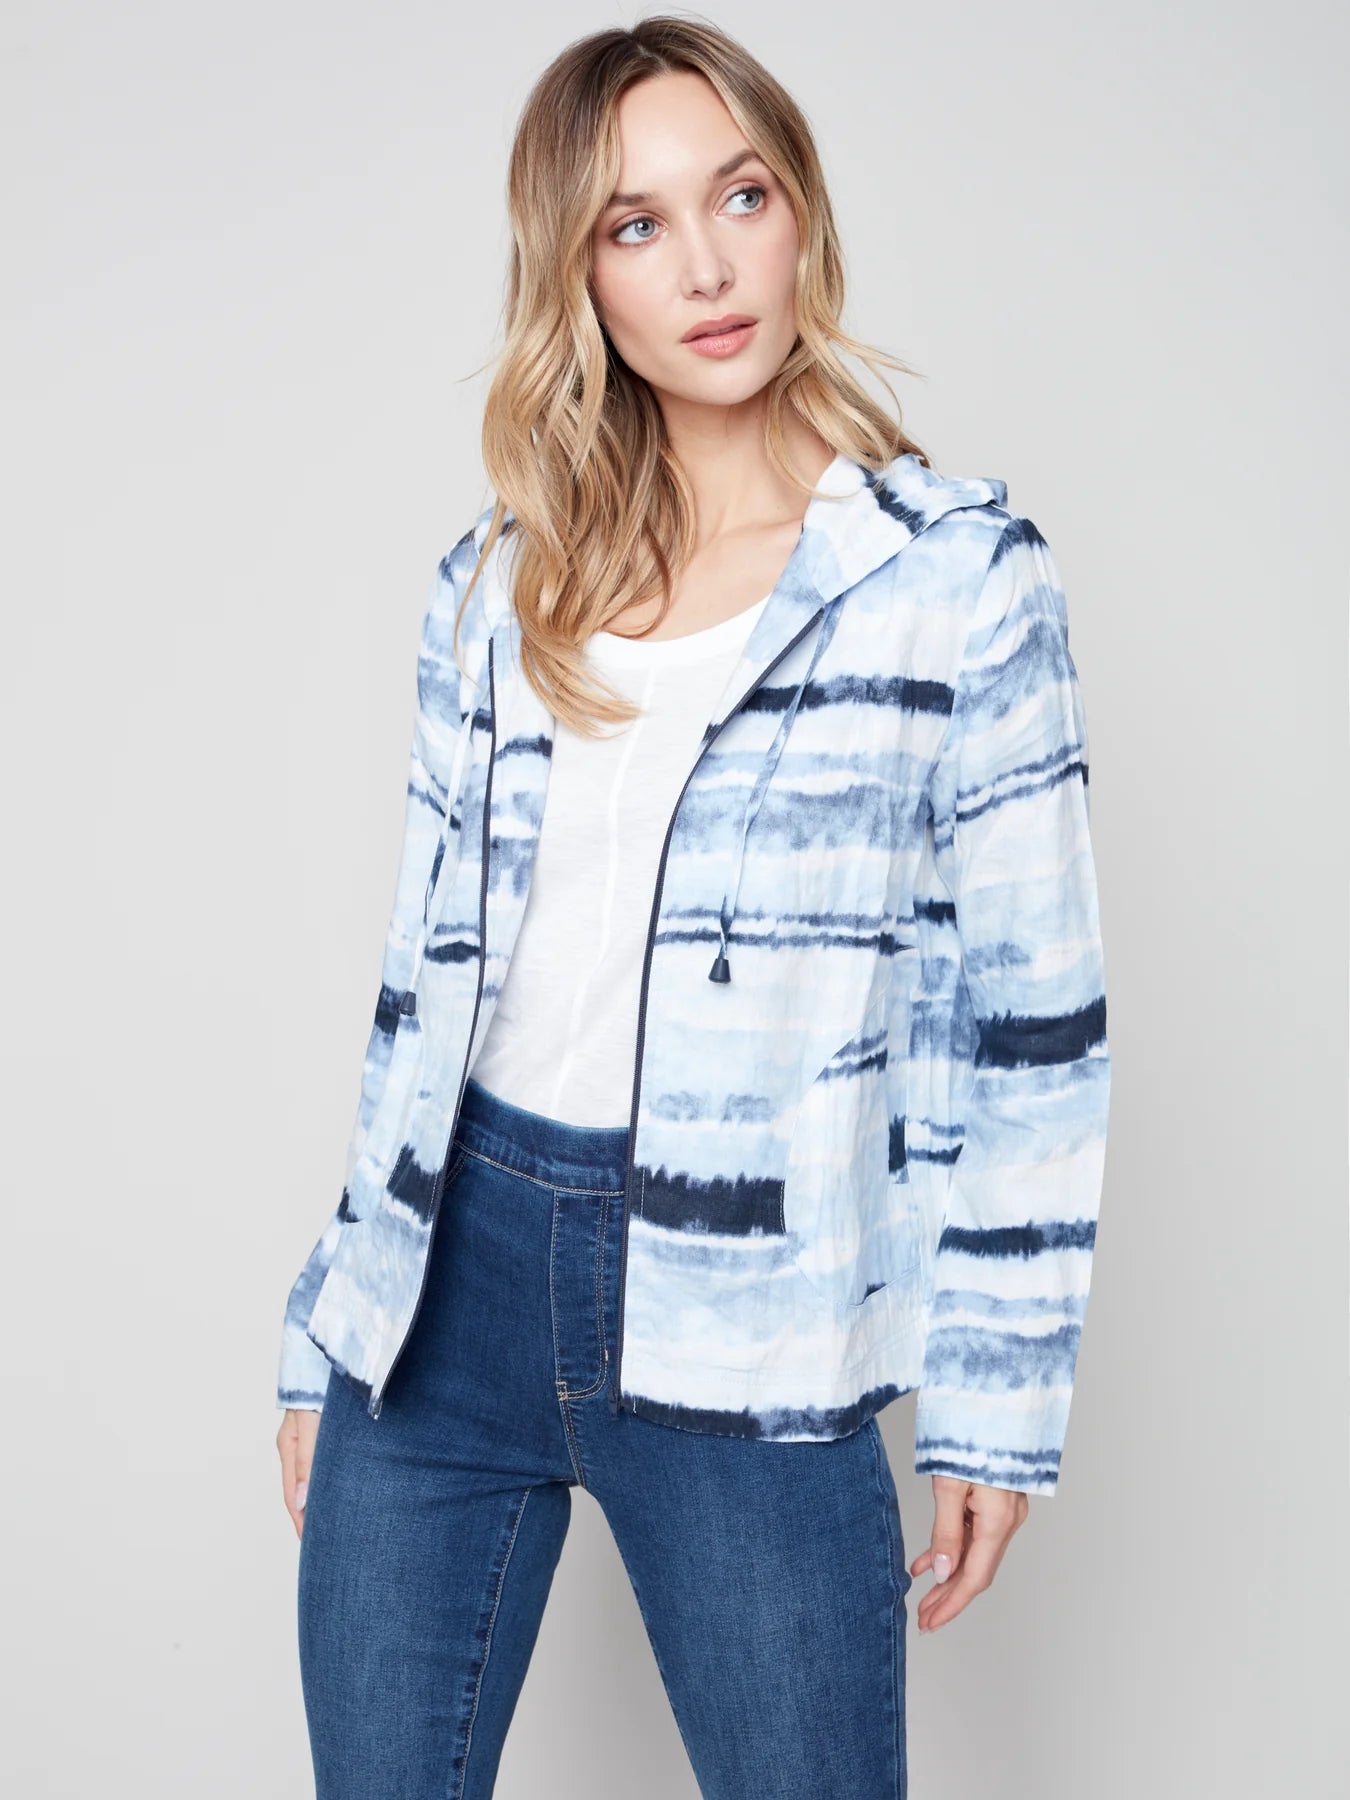 Charlie B Ombre Striped Linen Jacket